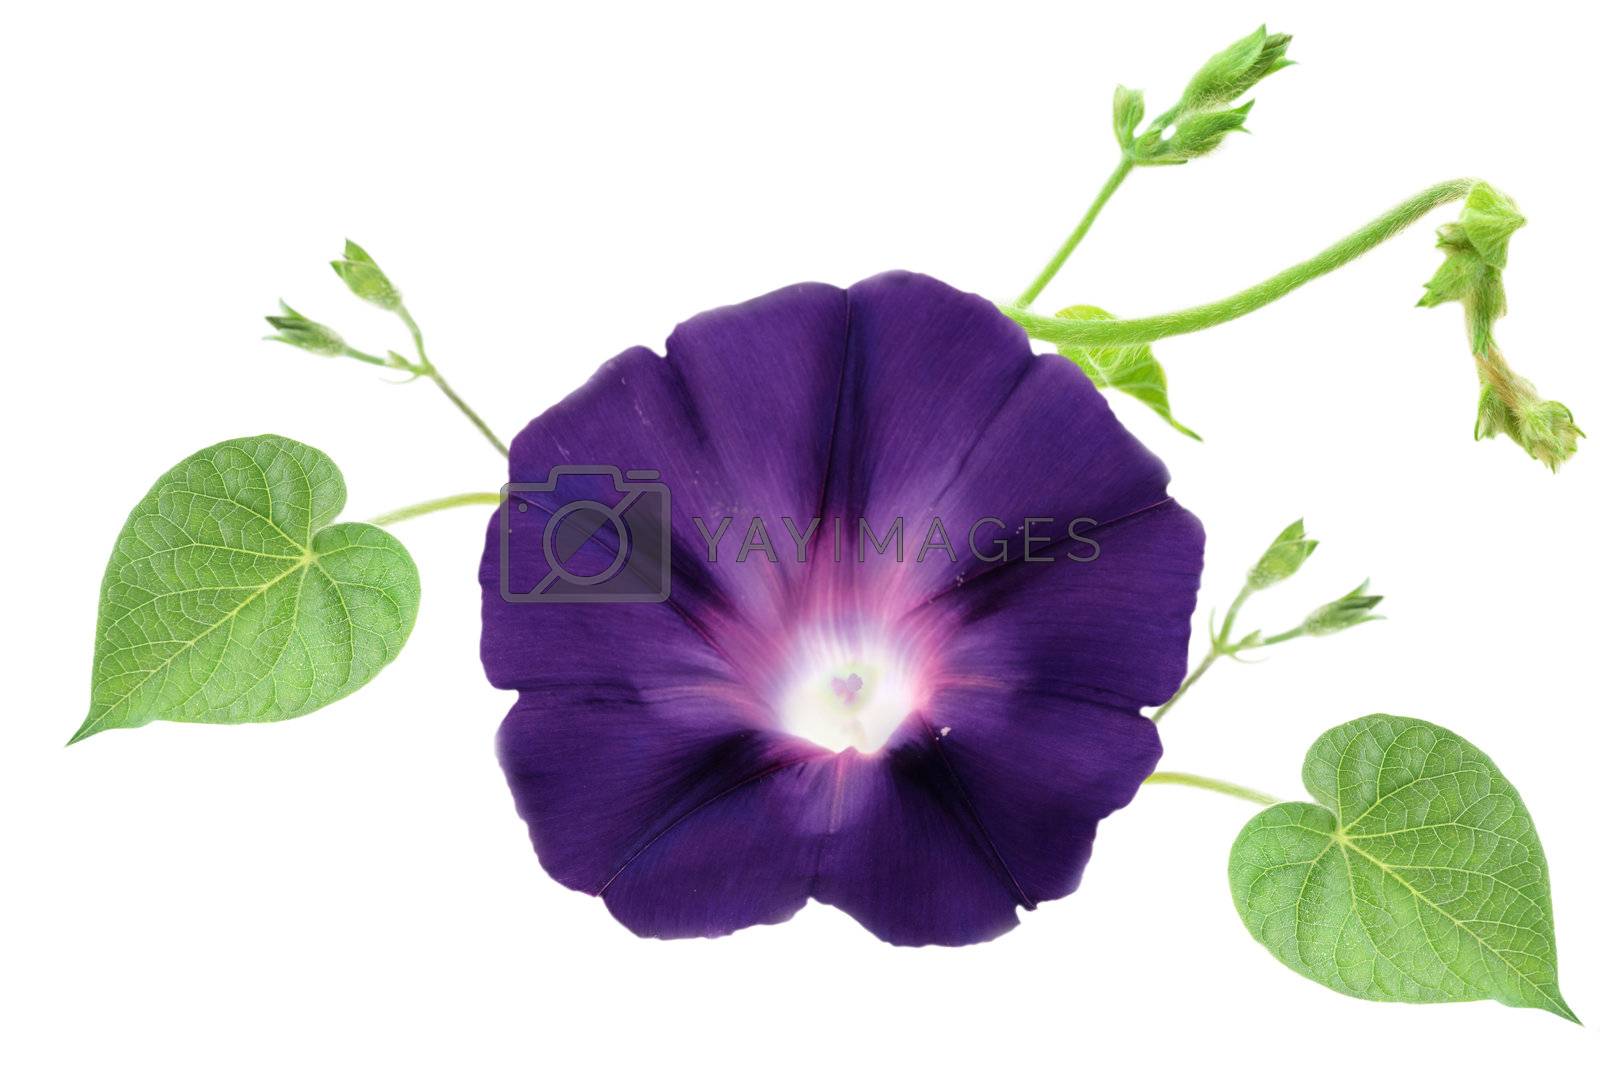 Royalty free image of Isolated Morning Glory by StephanieFrey